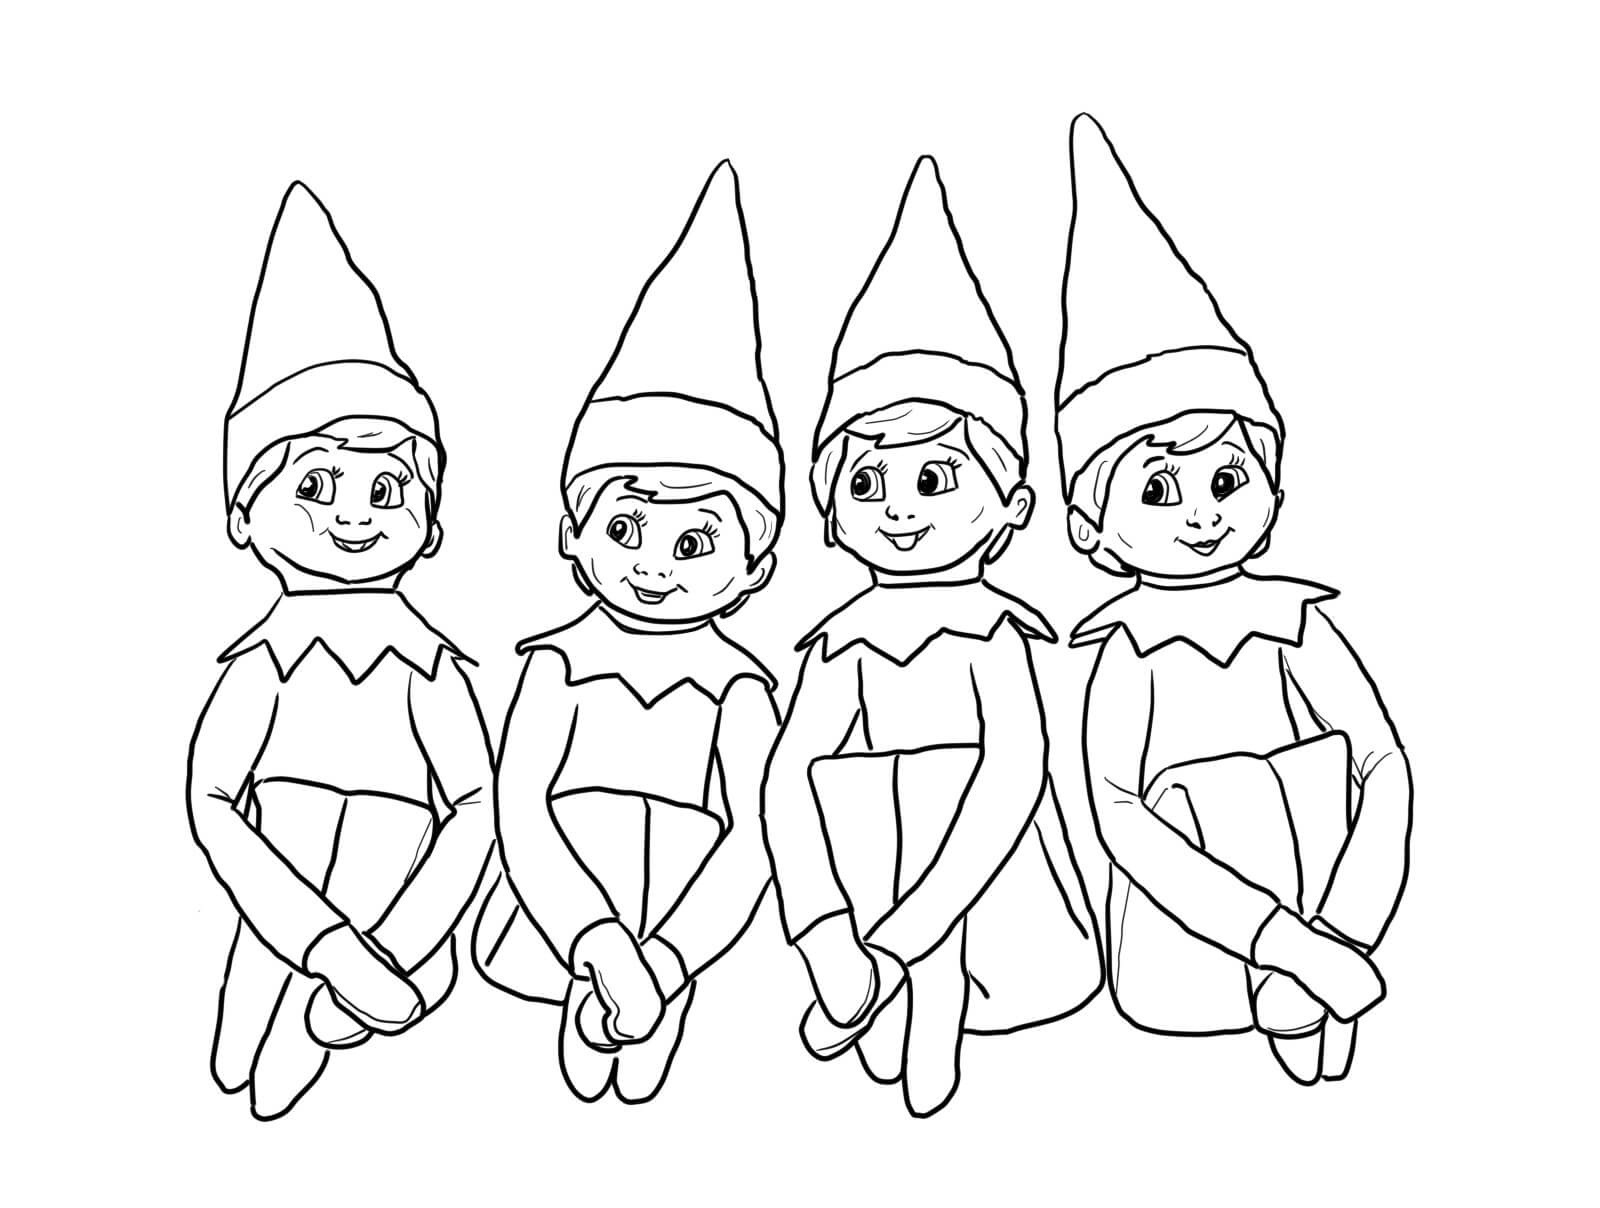 elves-on-the-shelf-coloring-page-free-printable-coloring-pages-for-kids